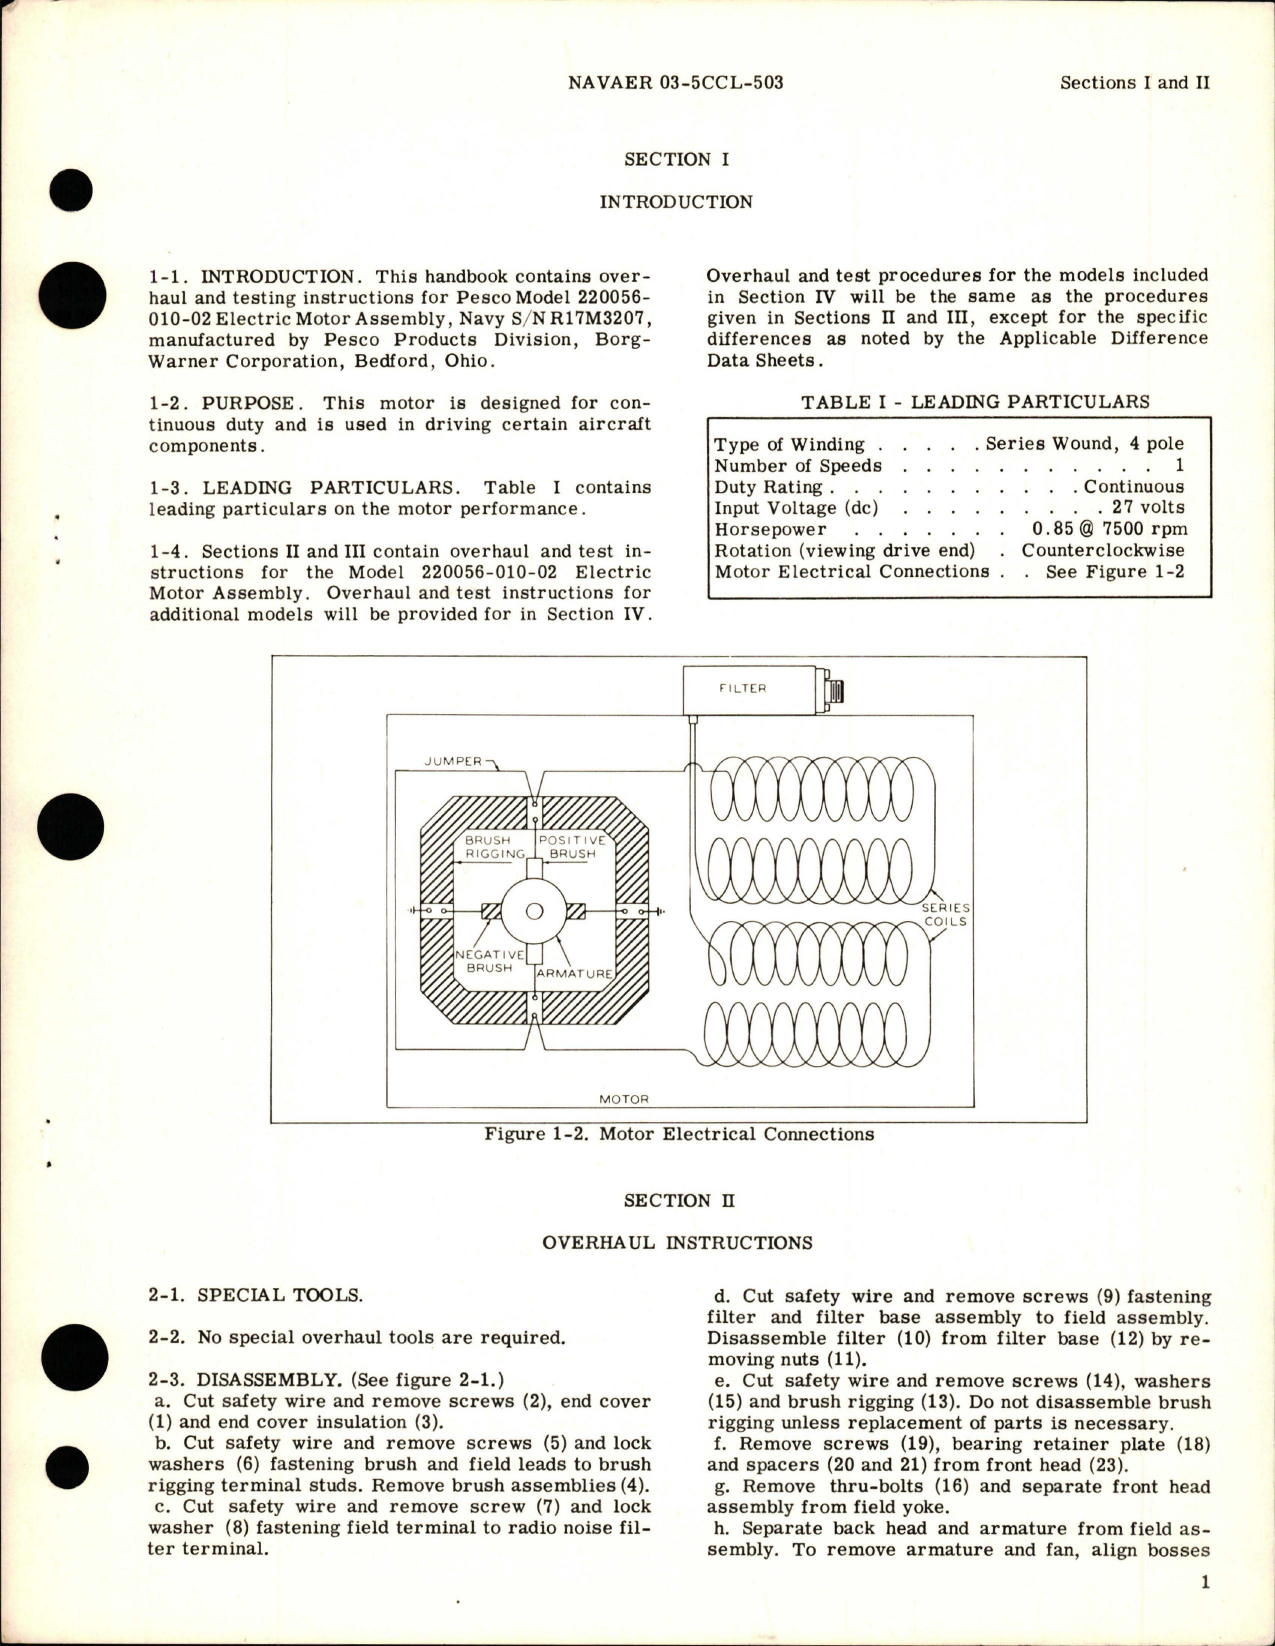 Sample page 5 from AirCorps Library document: Overhaul Instructions for Electric Motor Assembly - Model 220056-010-02 